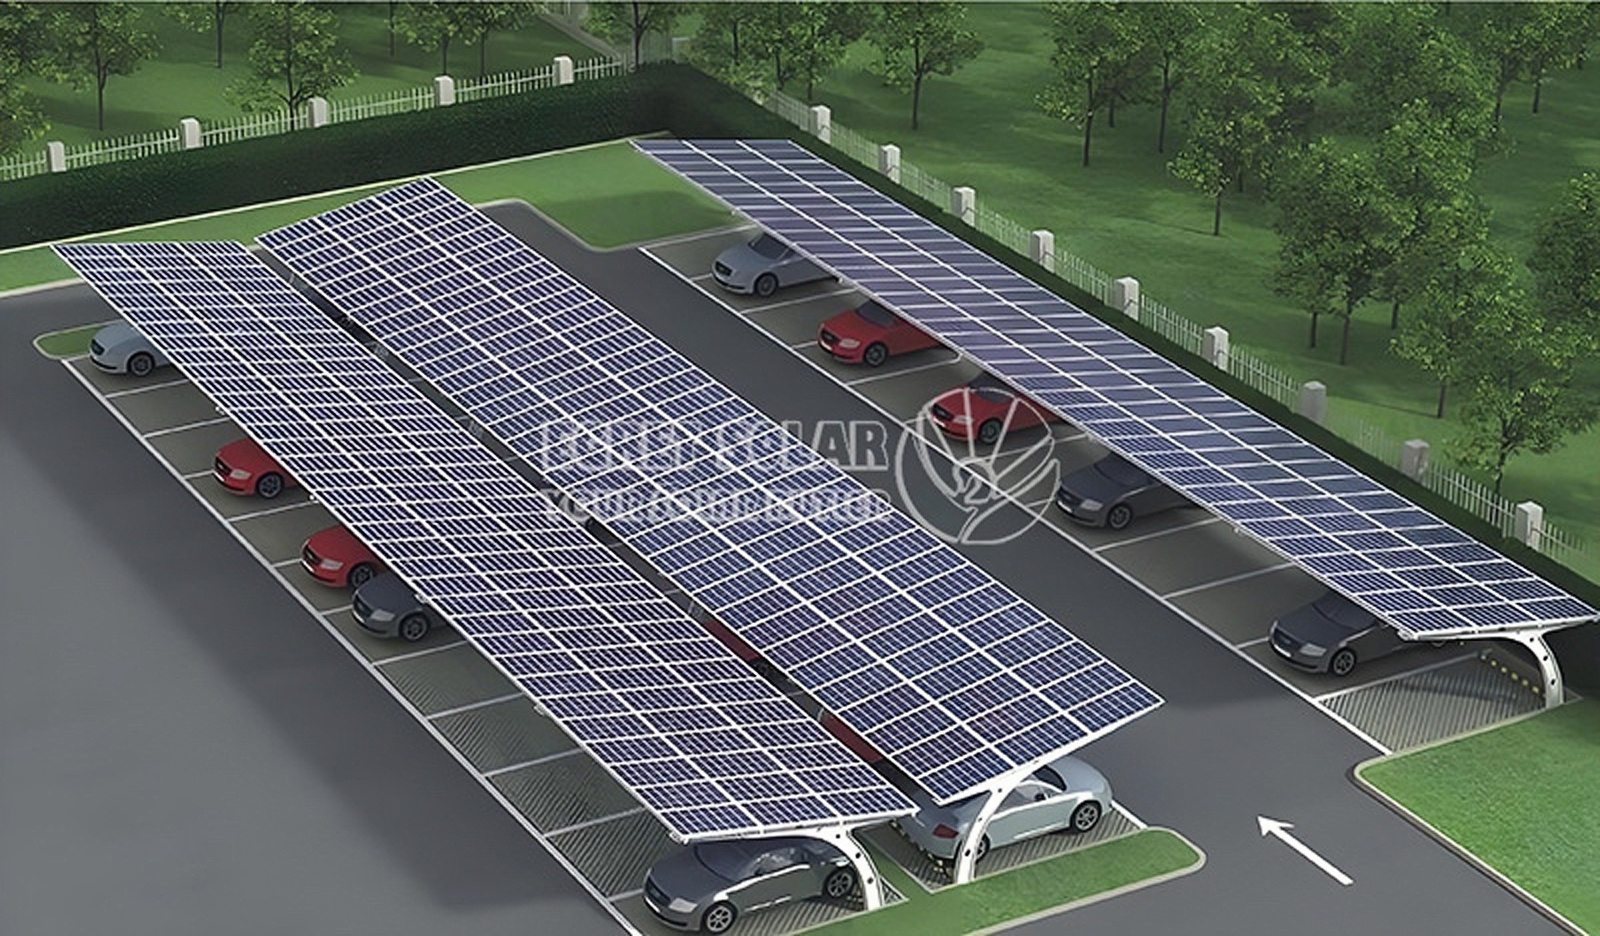 Carbon Steel Solar Carport: Driving Force for a Green Future